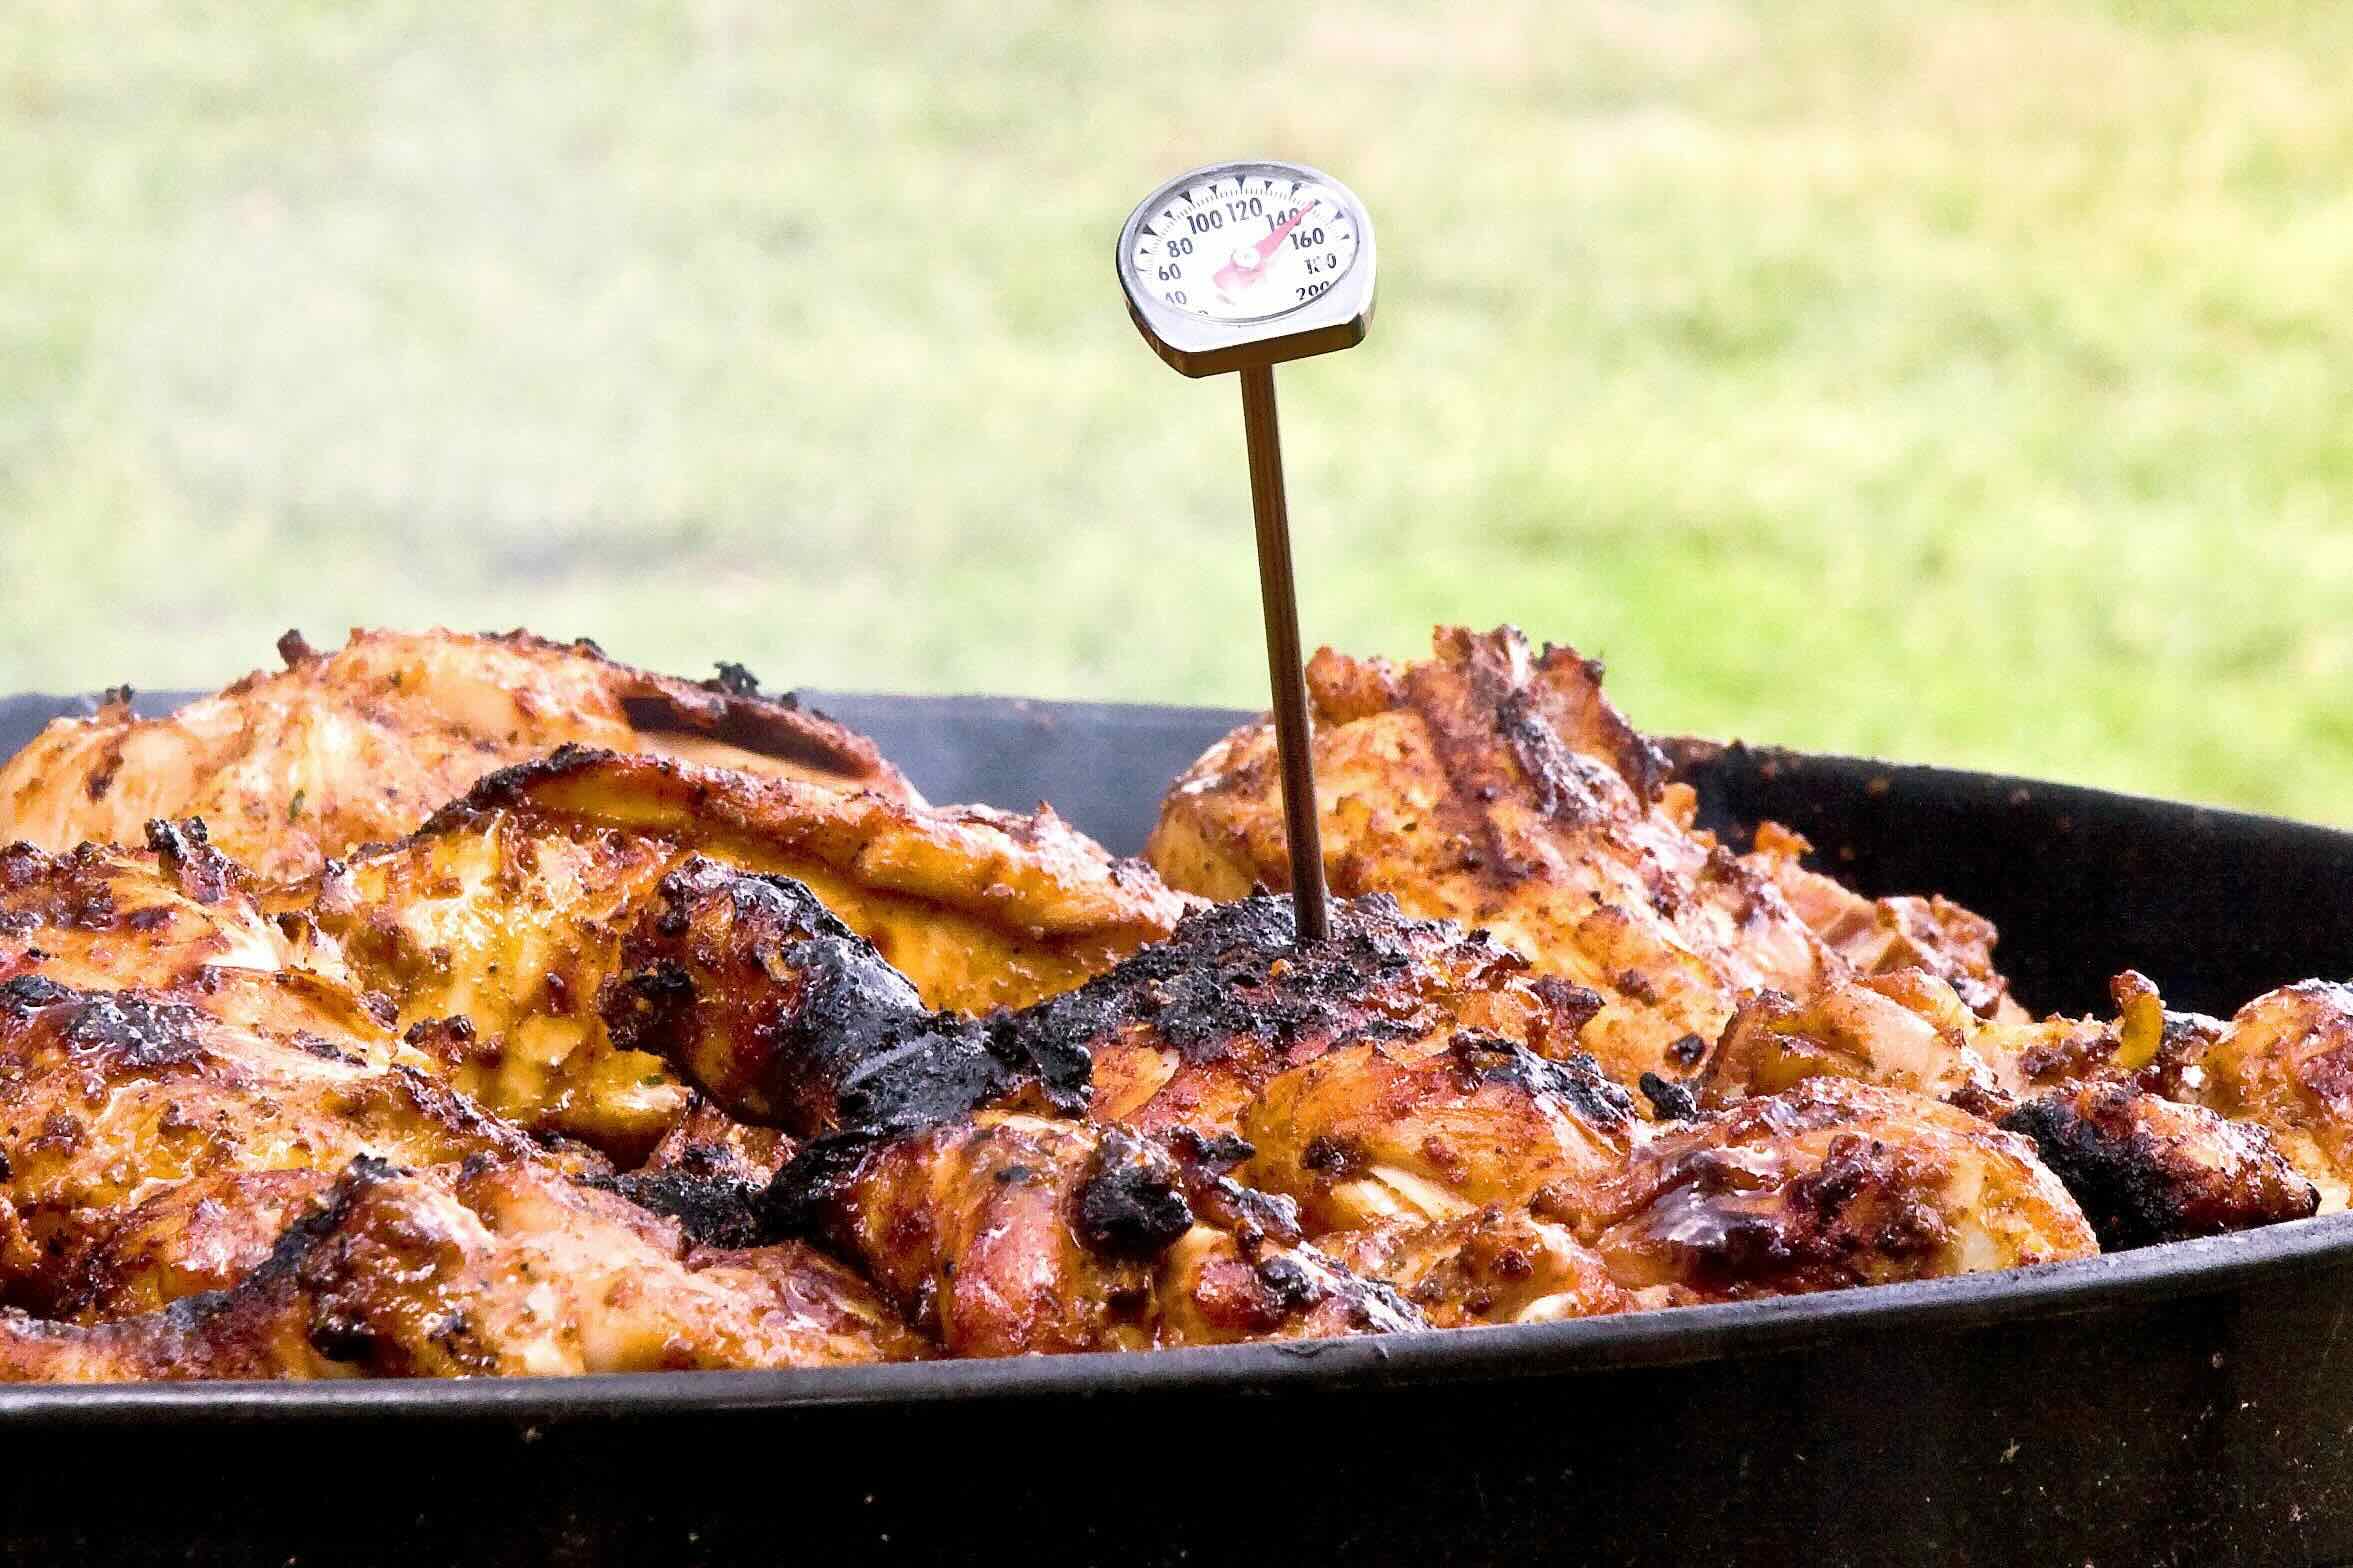 What Is The Correct Temperature For Barbecue Chicken That Is Being Prepared At An Outdoor Event